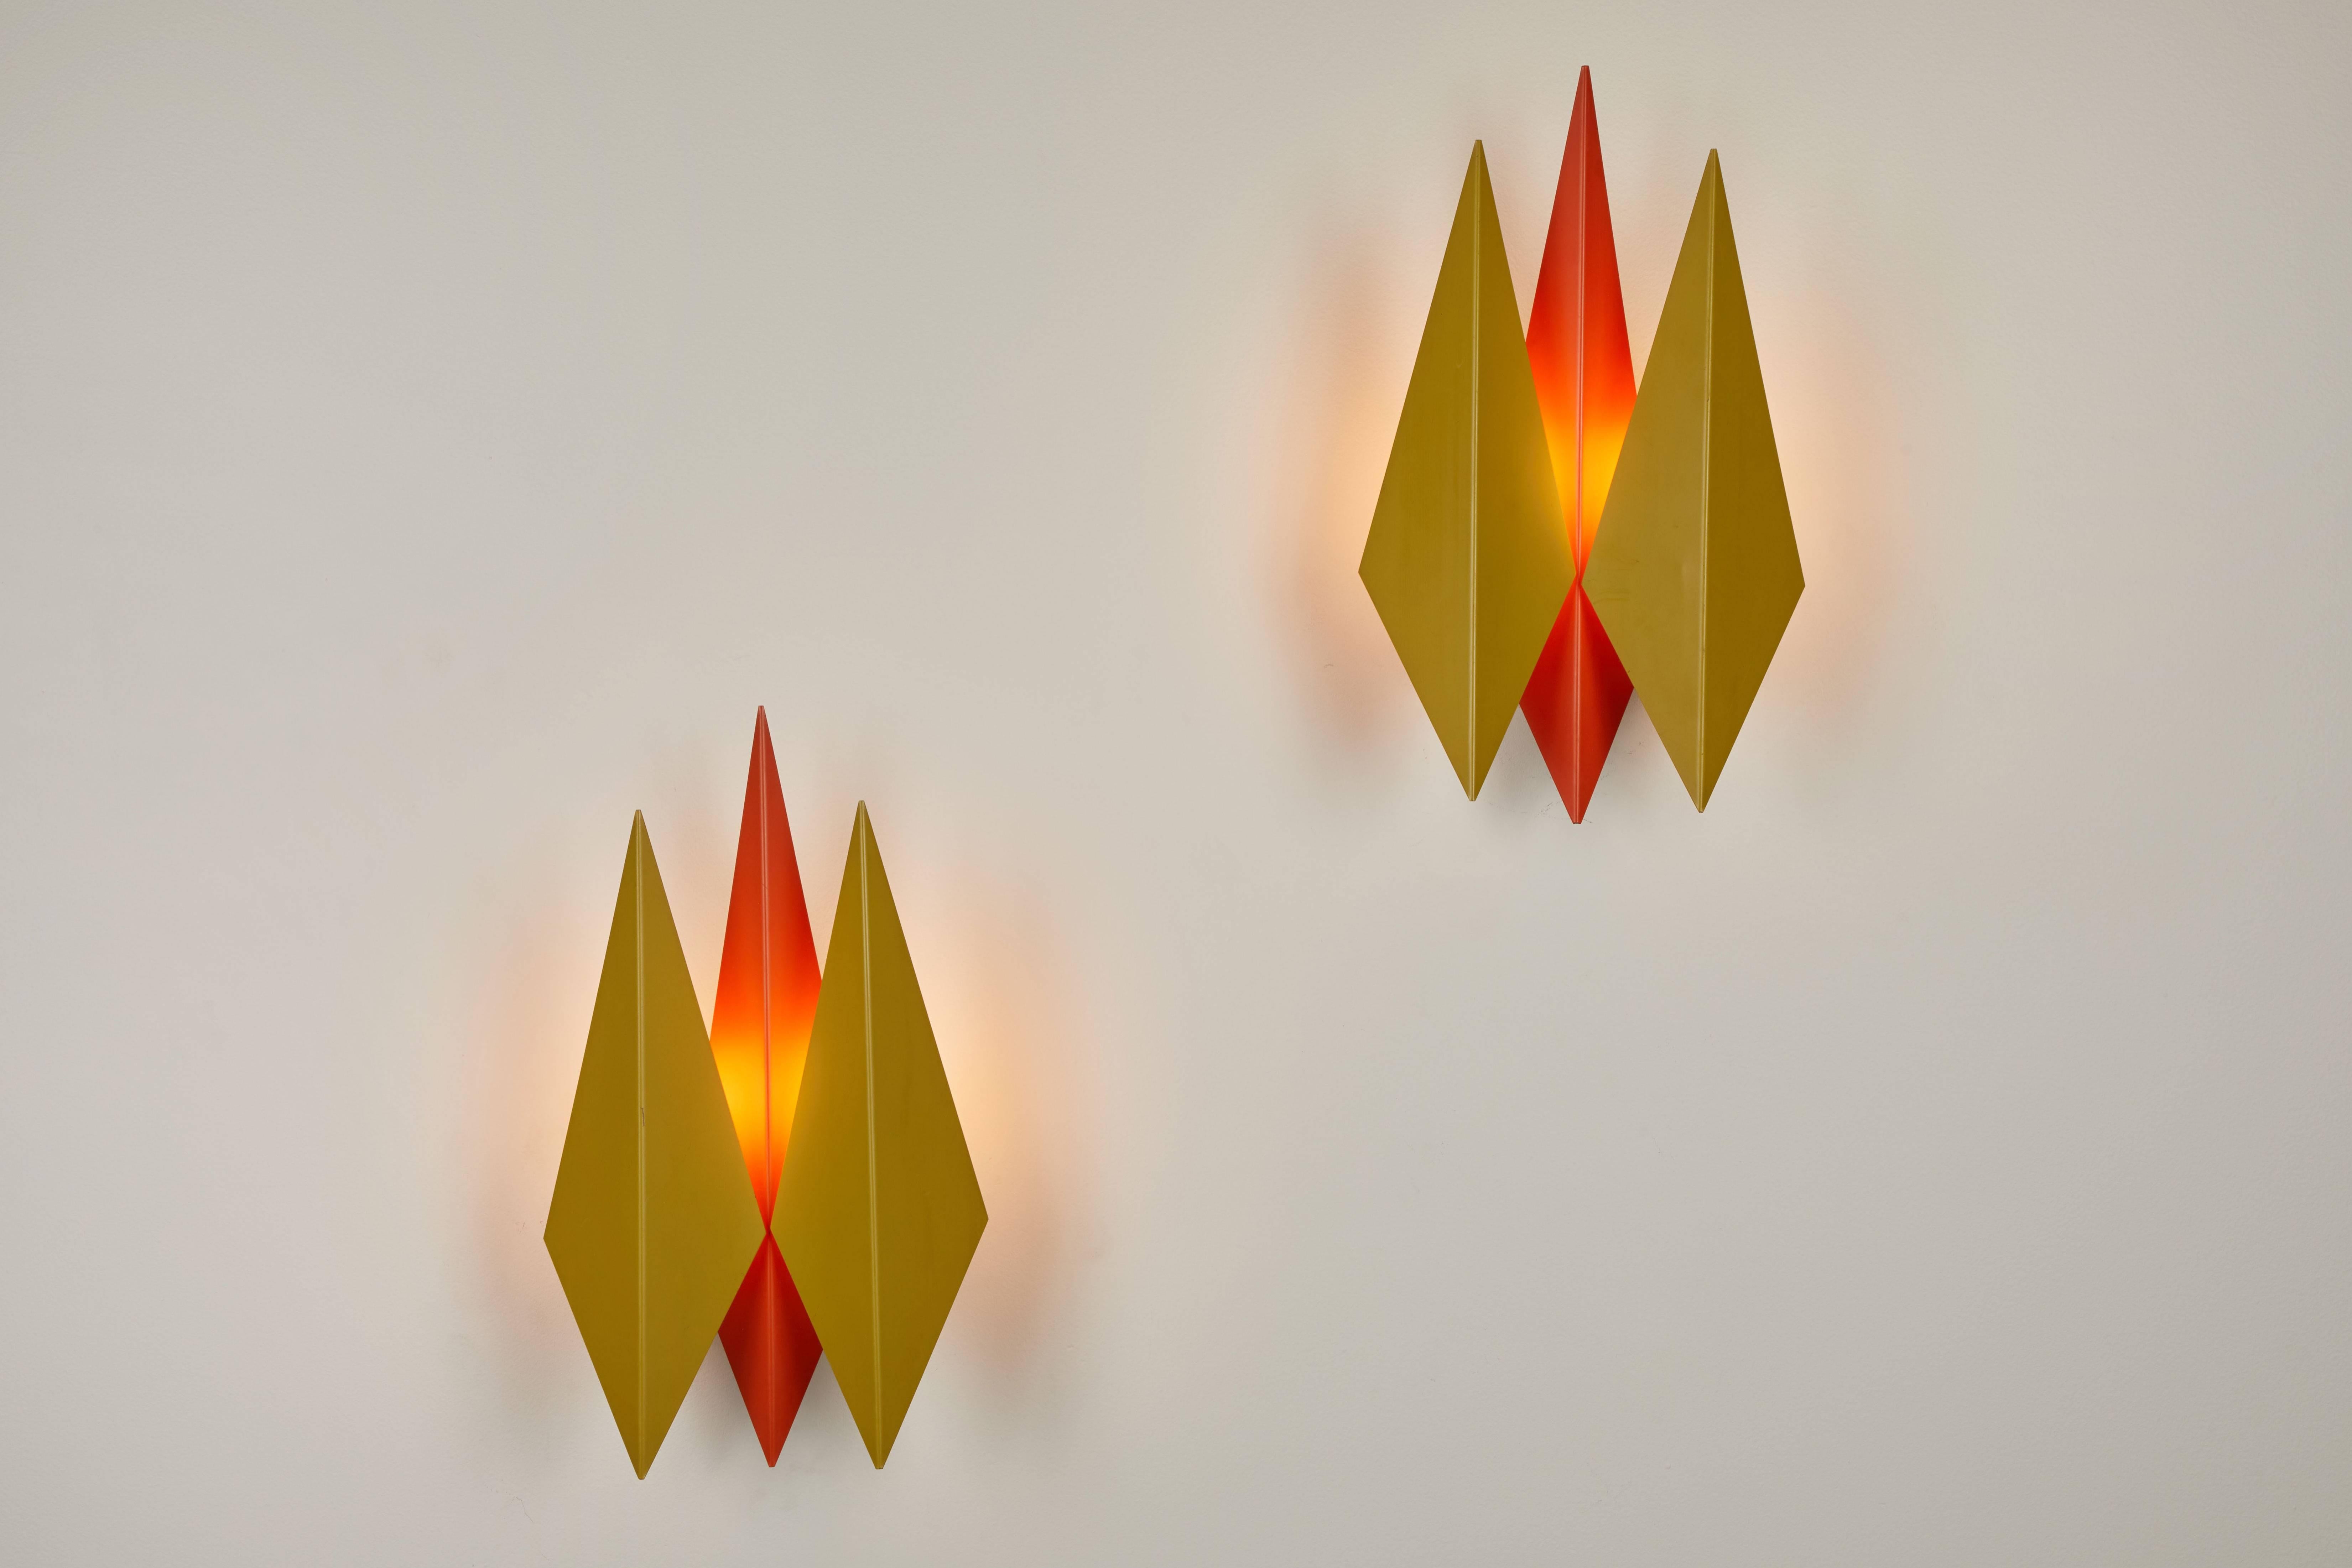 Pair of model 5161 wall sconces designed by Svend Aage Holm Sorensen in Denmark during the 1960s for Holm Sorenson & Co. The sconces feature three folded kite-shaped shades in original painted metal. Wired for US junction boxes, each sconce takes